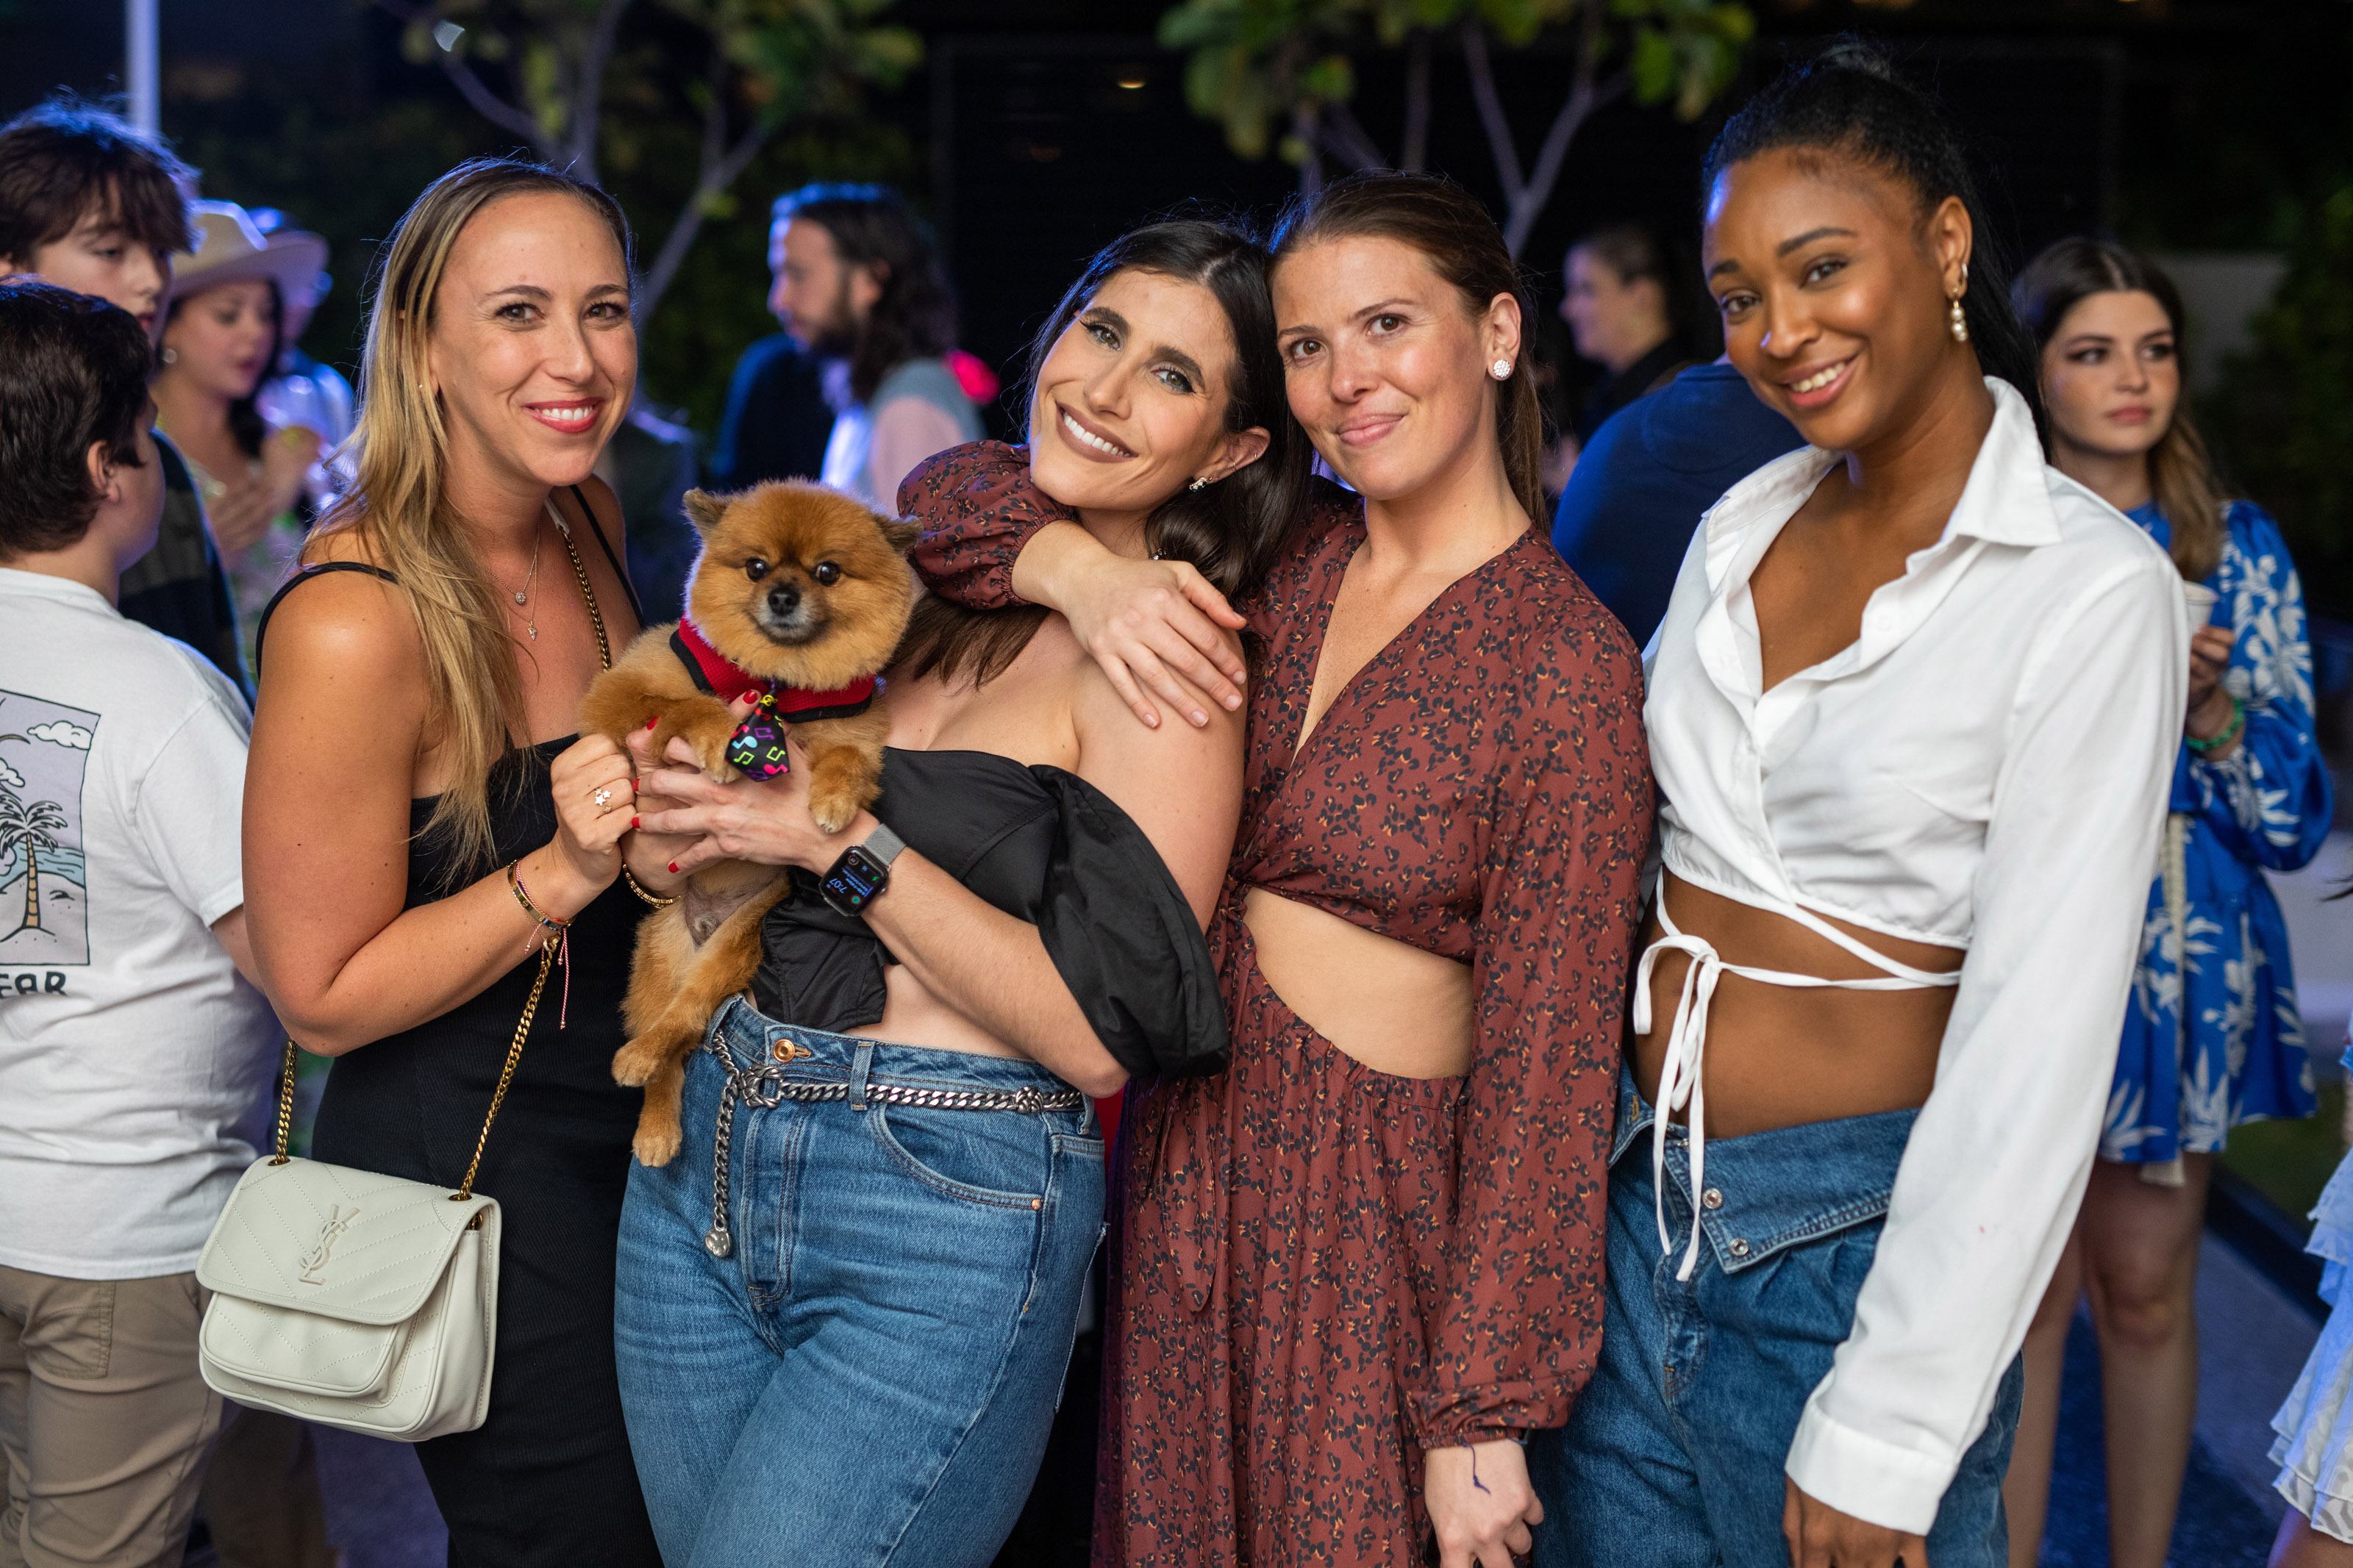 A group of women smile for a photo with a dog